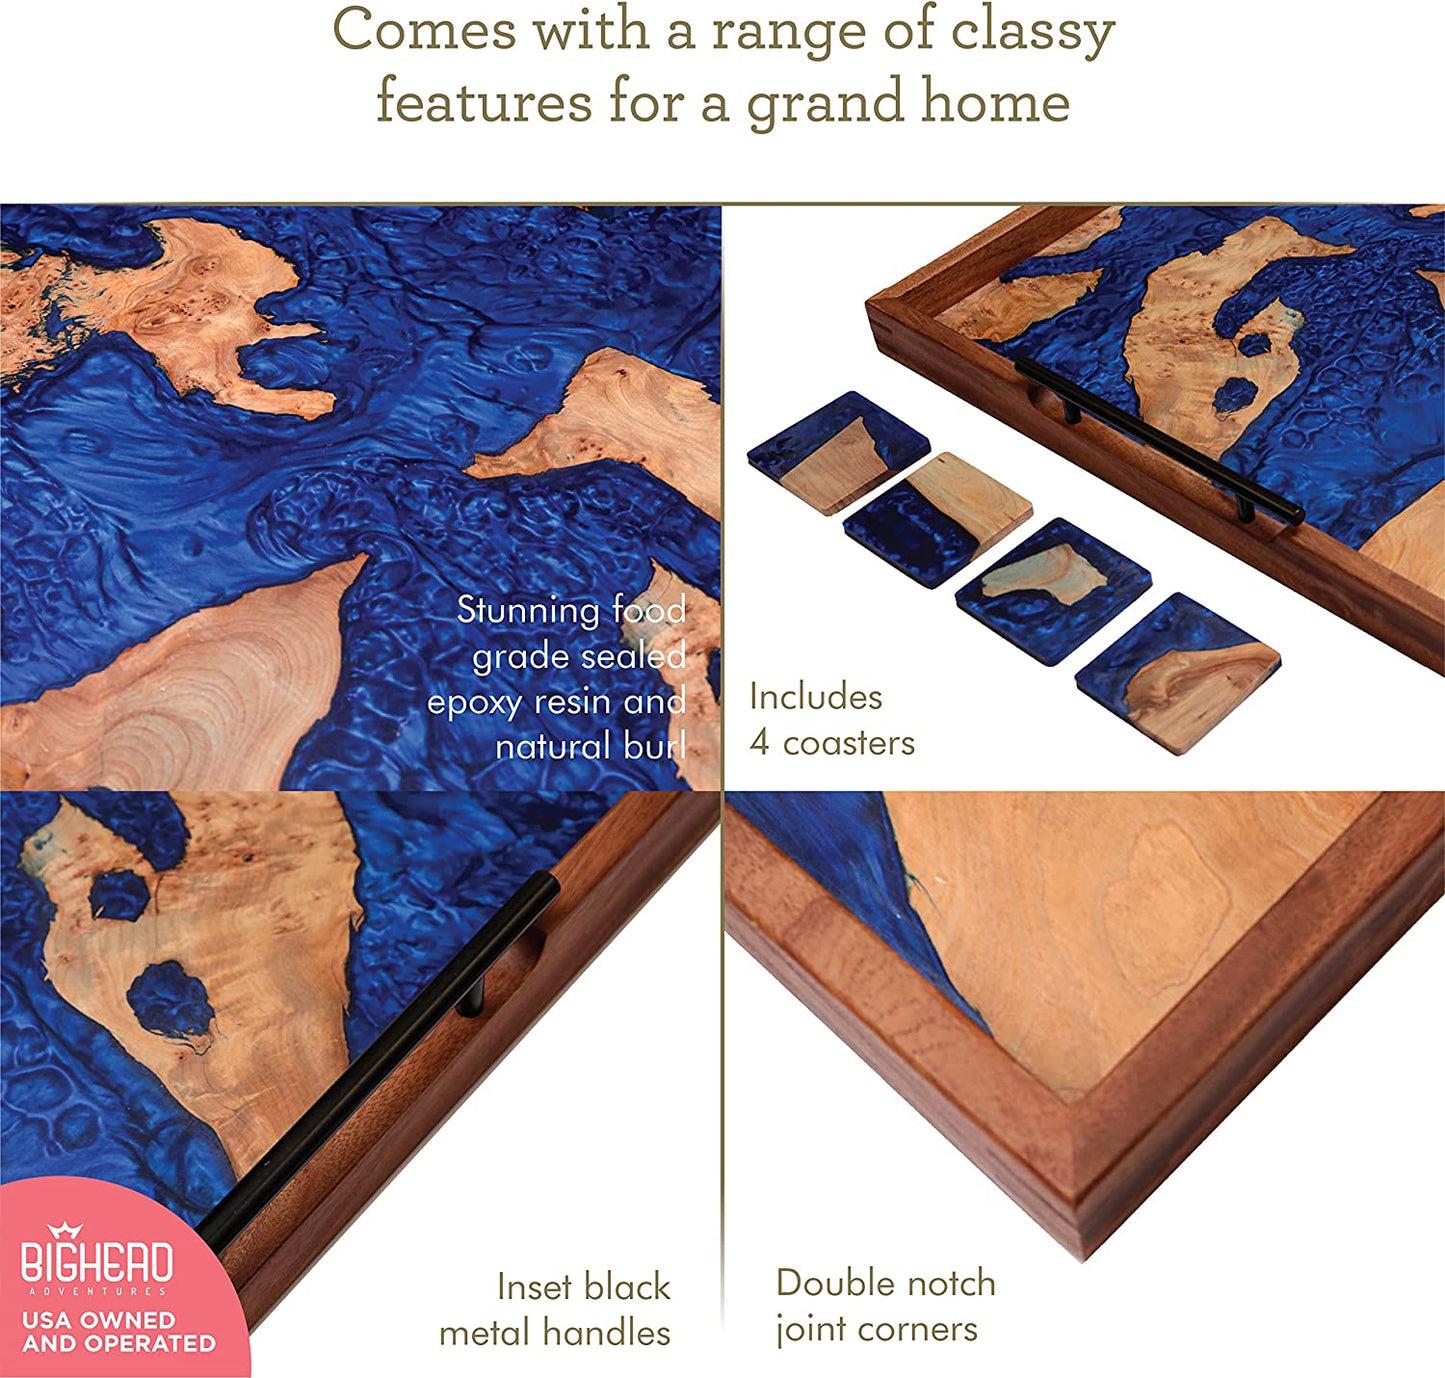 Bighead Epoxy Serving Tray Burl Tray with Epoxy Resin- Large Sized Blue Epoxy Wooden Tray-Ocean Inspired Resin Serving Tray for Home Decor Coffee Tray-with 4 Coaster Set (Blue)